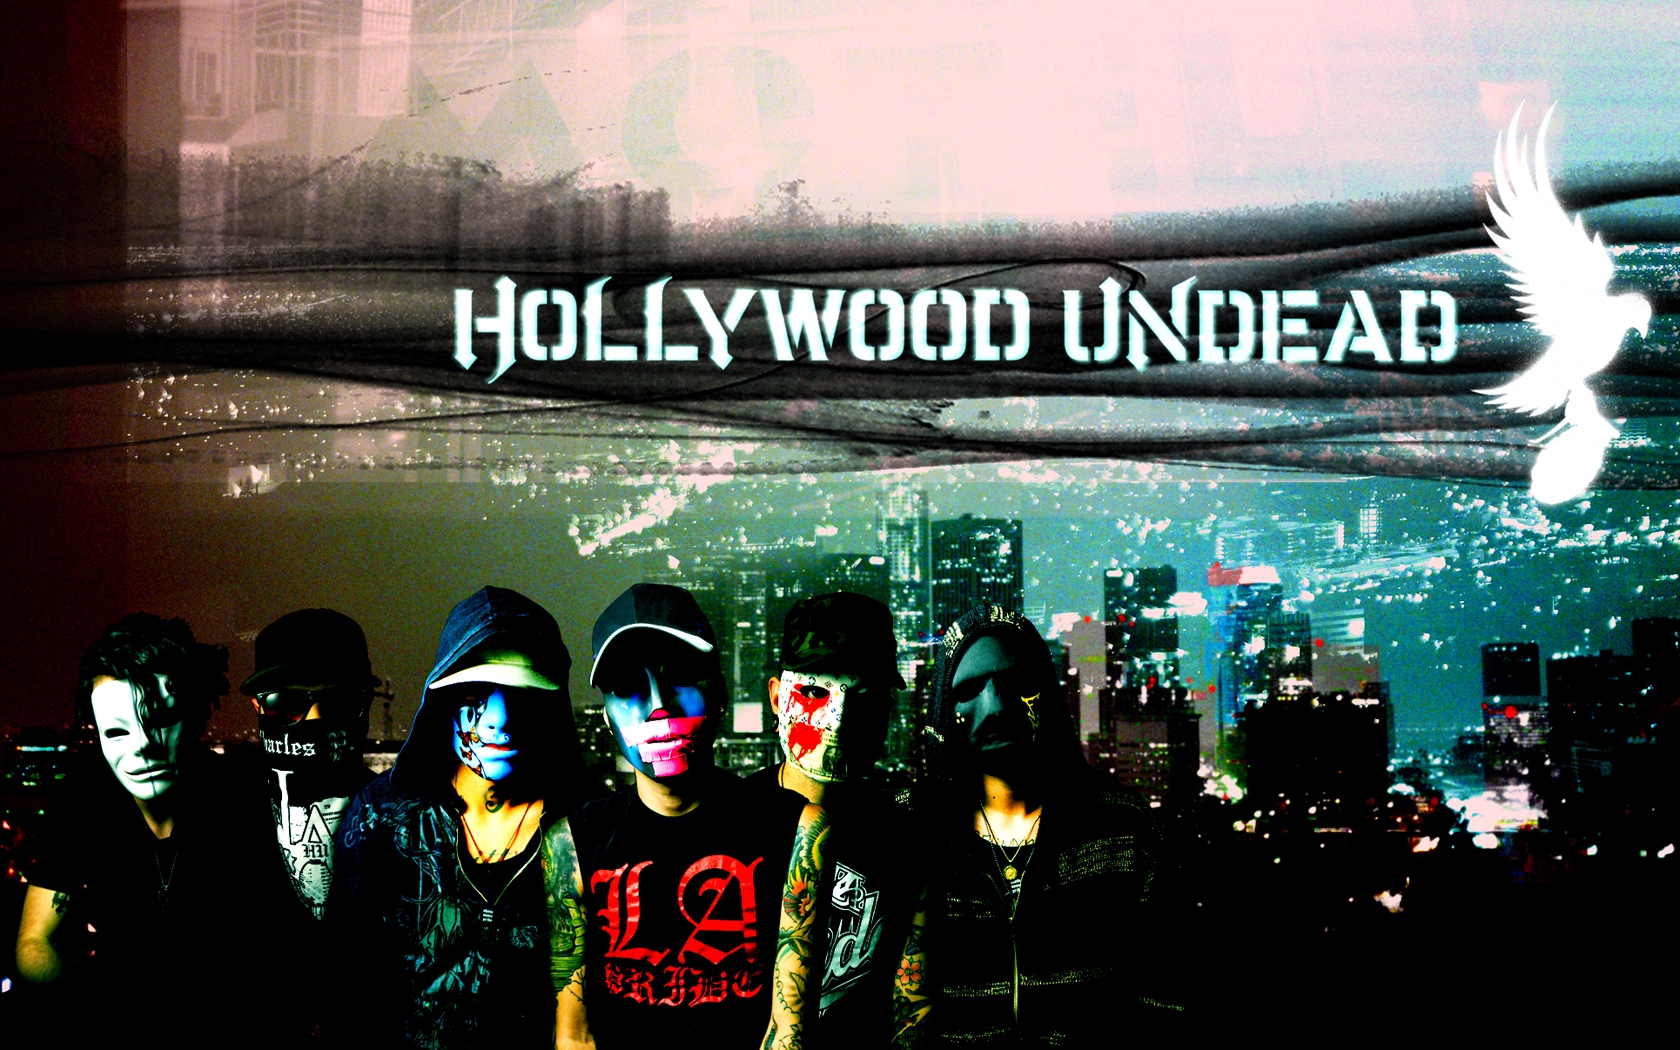  hollywood undead hd wallpaper color palette tags hollywood undead